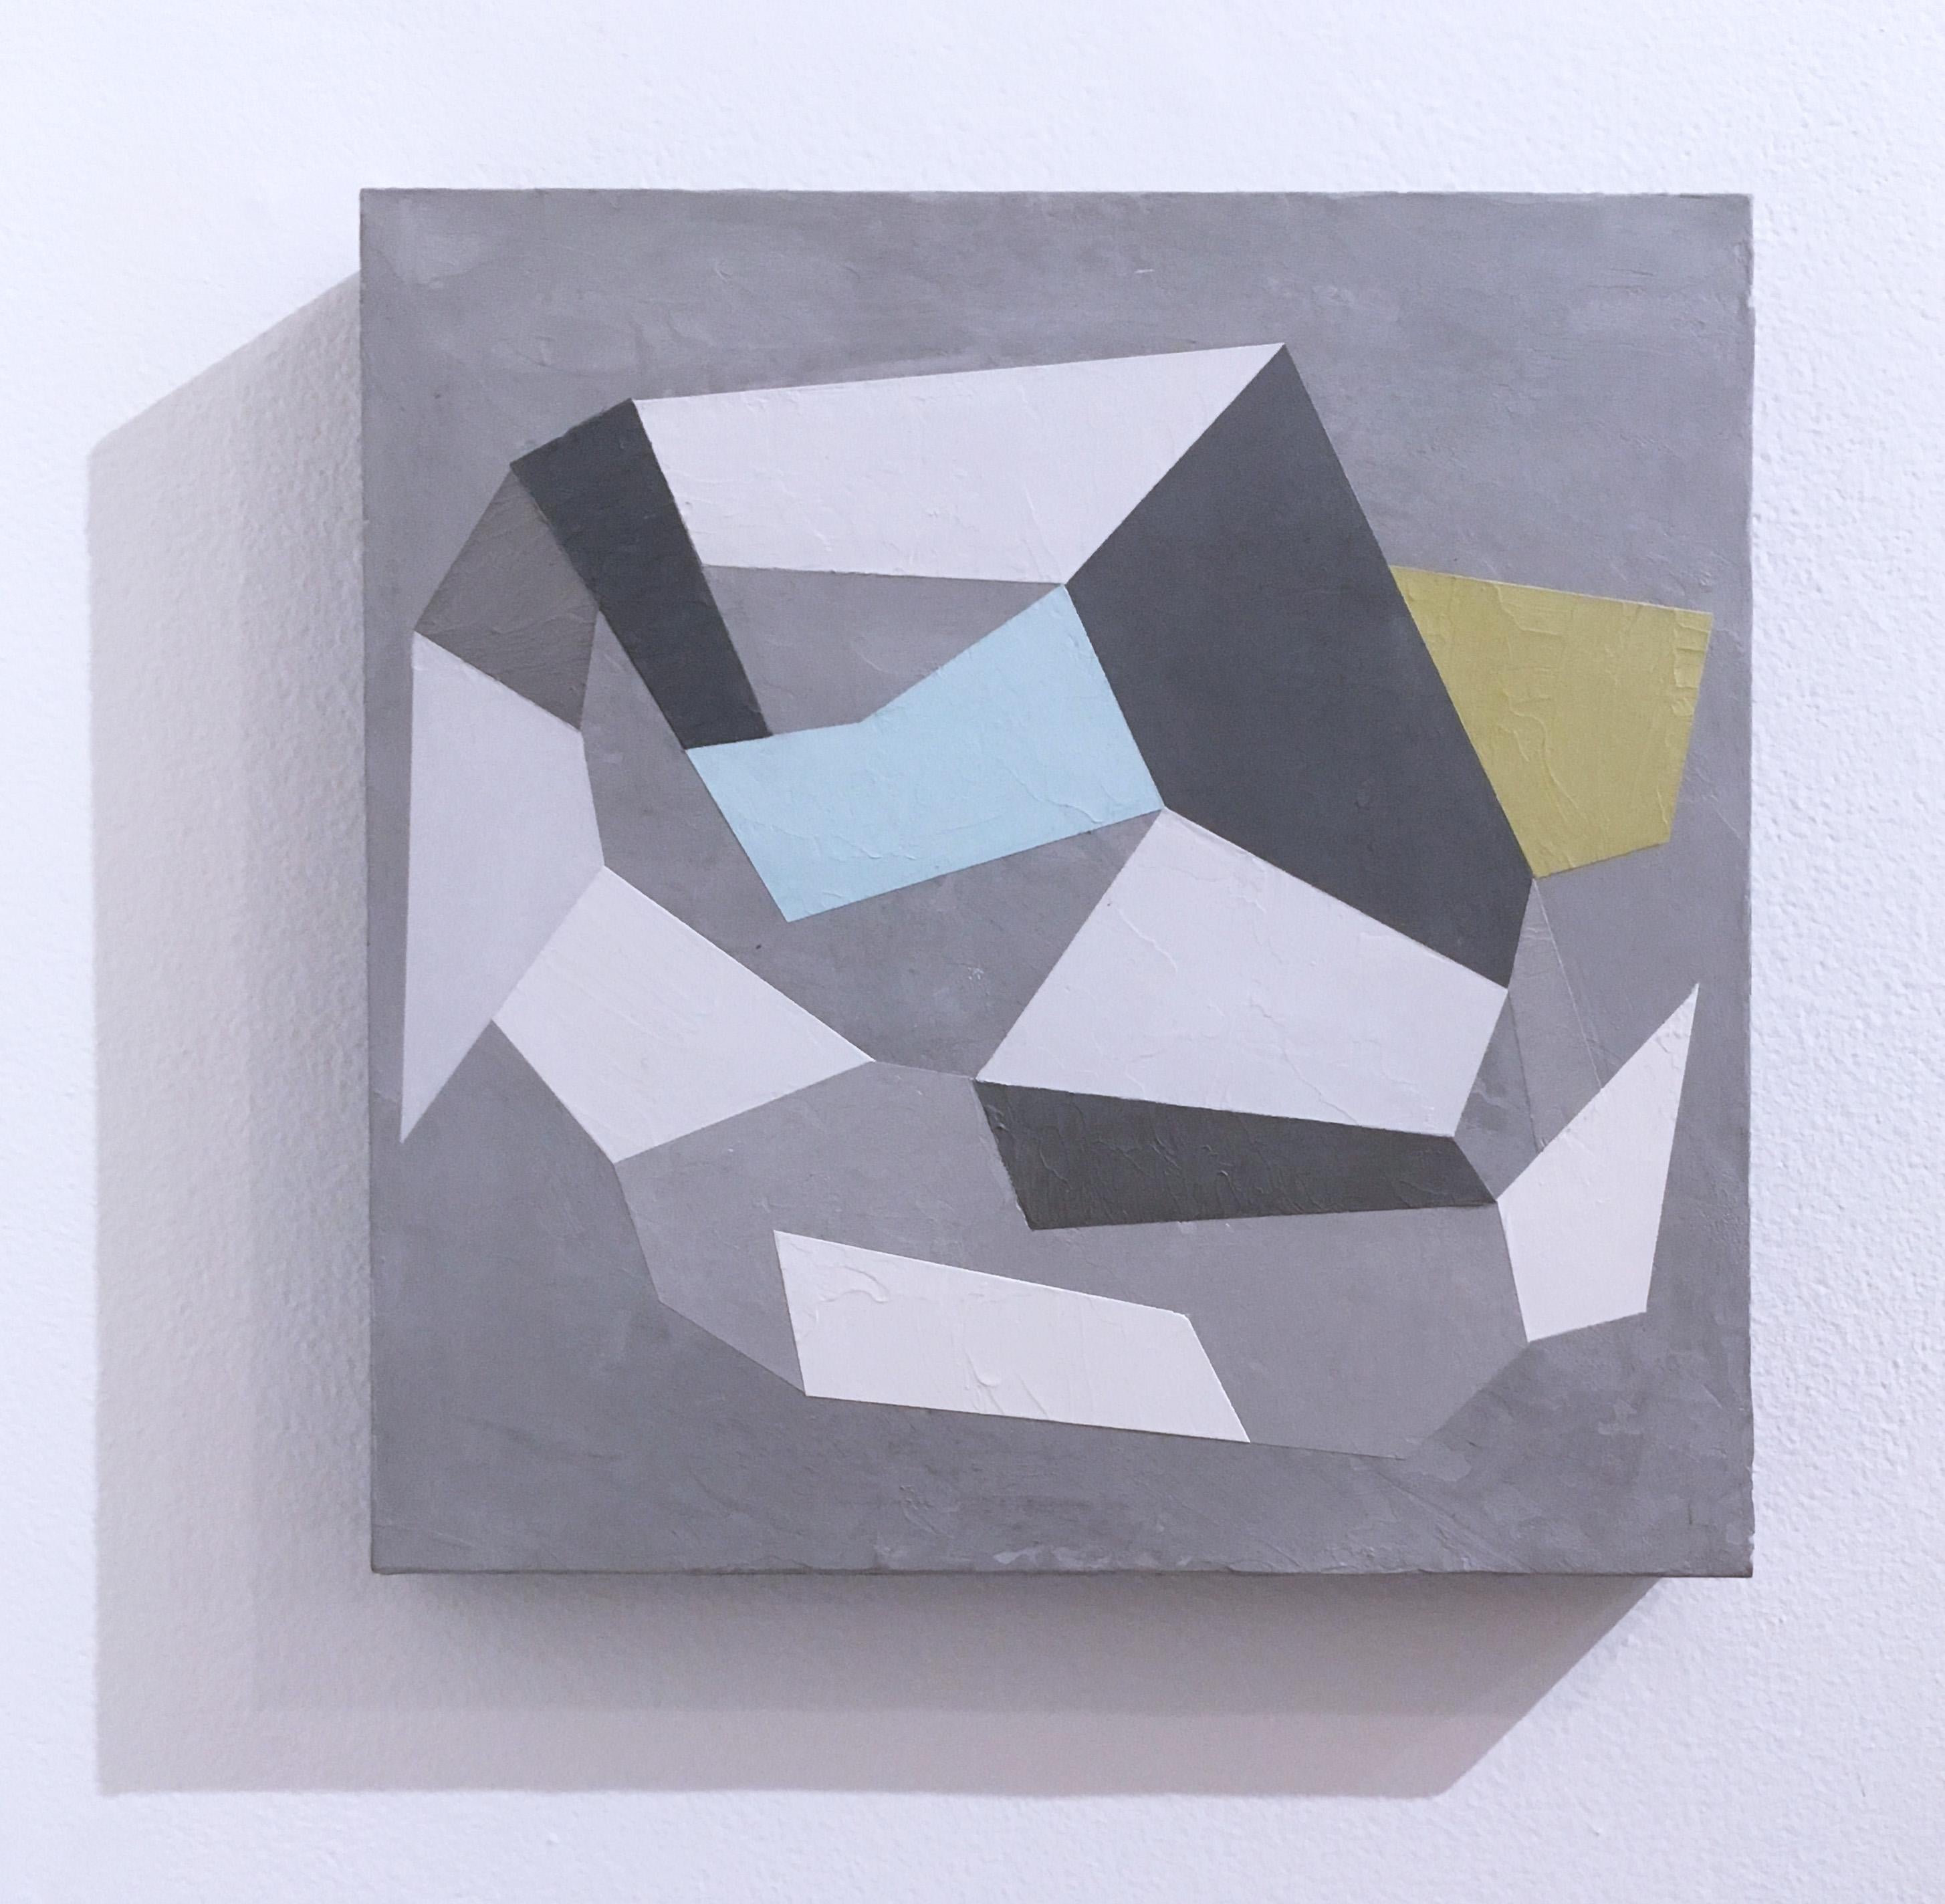 Habitat Fragmentation III, 2020, Abstract geometry, non-objective, plaster, gray - Painting by Kati Vilim